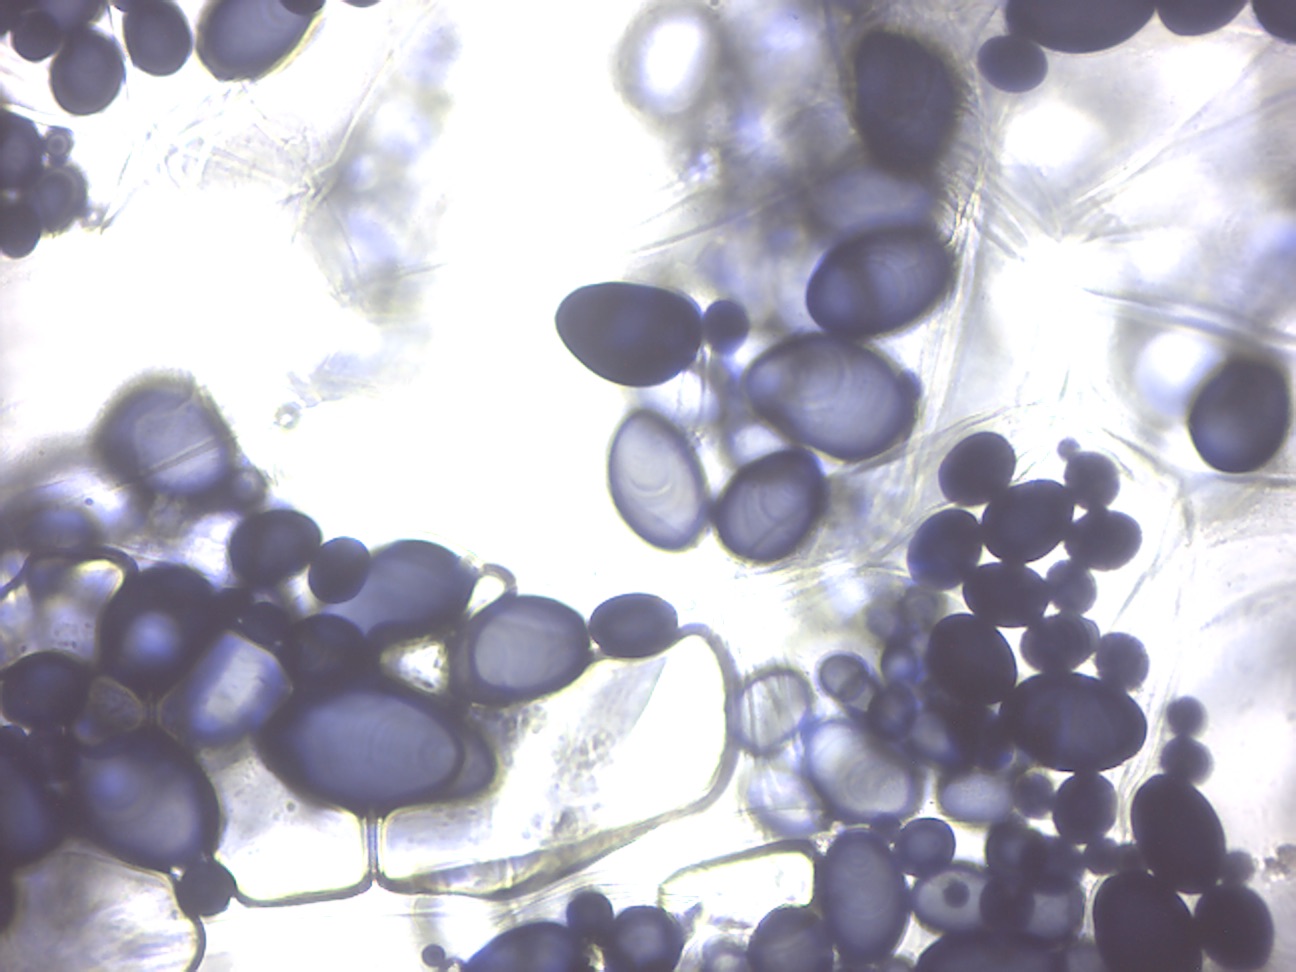 Amyloblasts in potato cells. The starch inside of the amyloplasts is stained blue-black by the iodine solution.